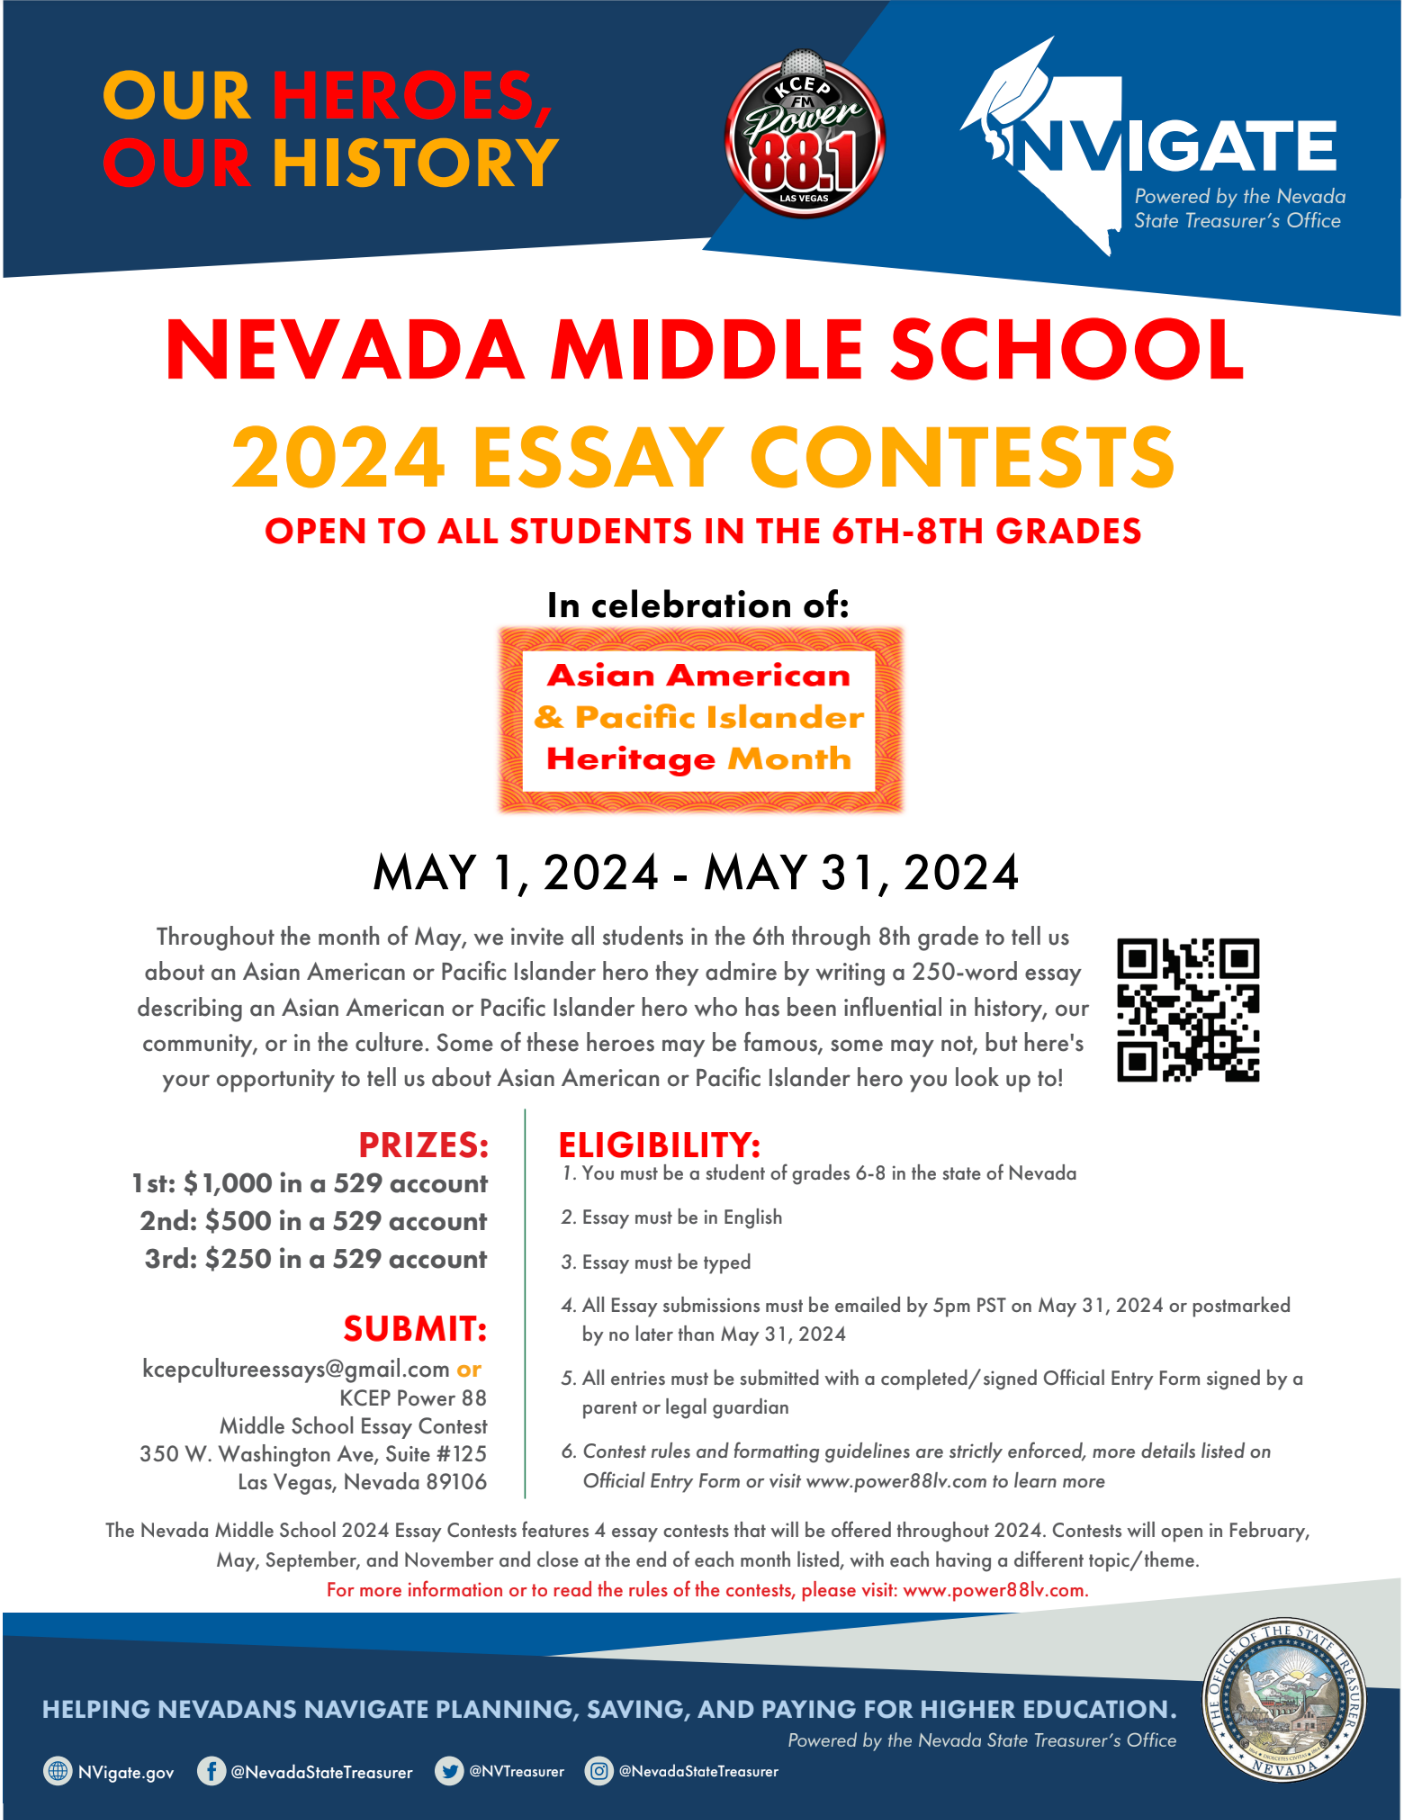 The nevada middle school 2024 essay contest is open to all students in the 6th and 7th grades.